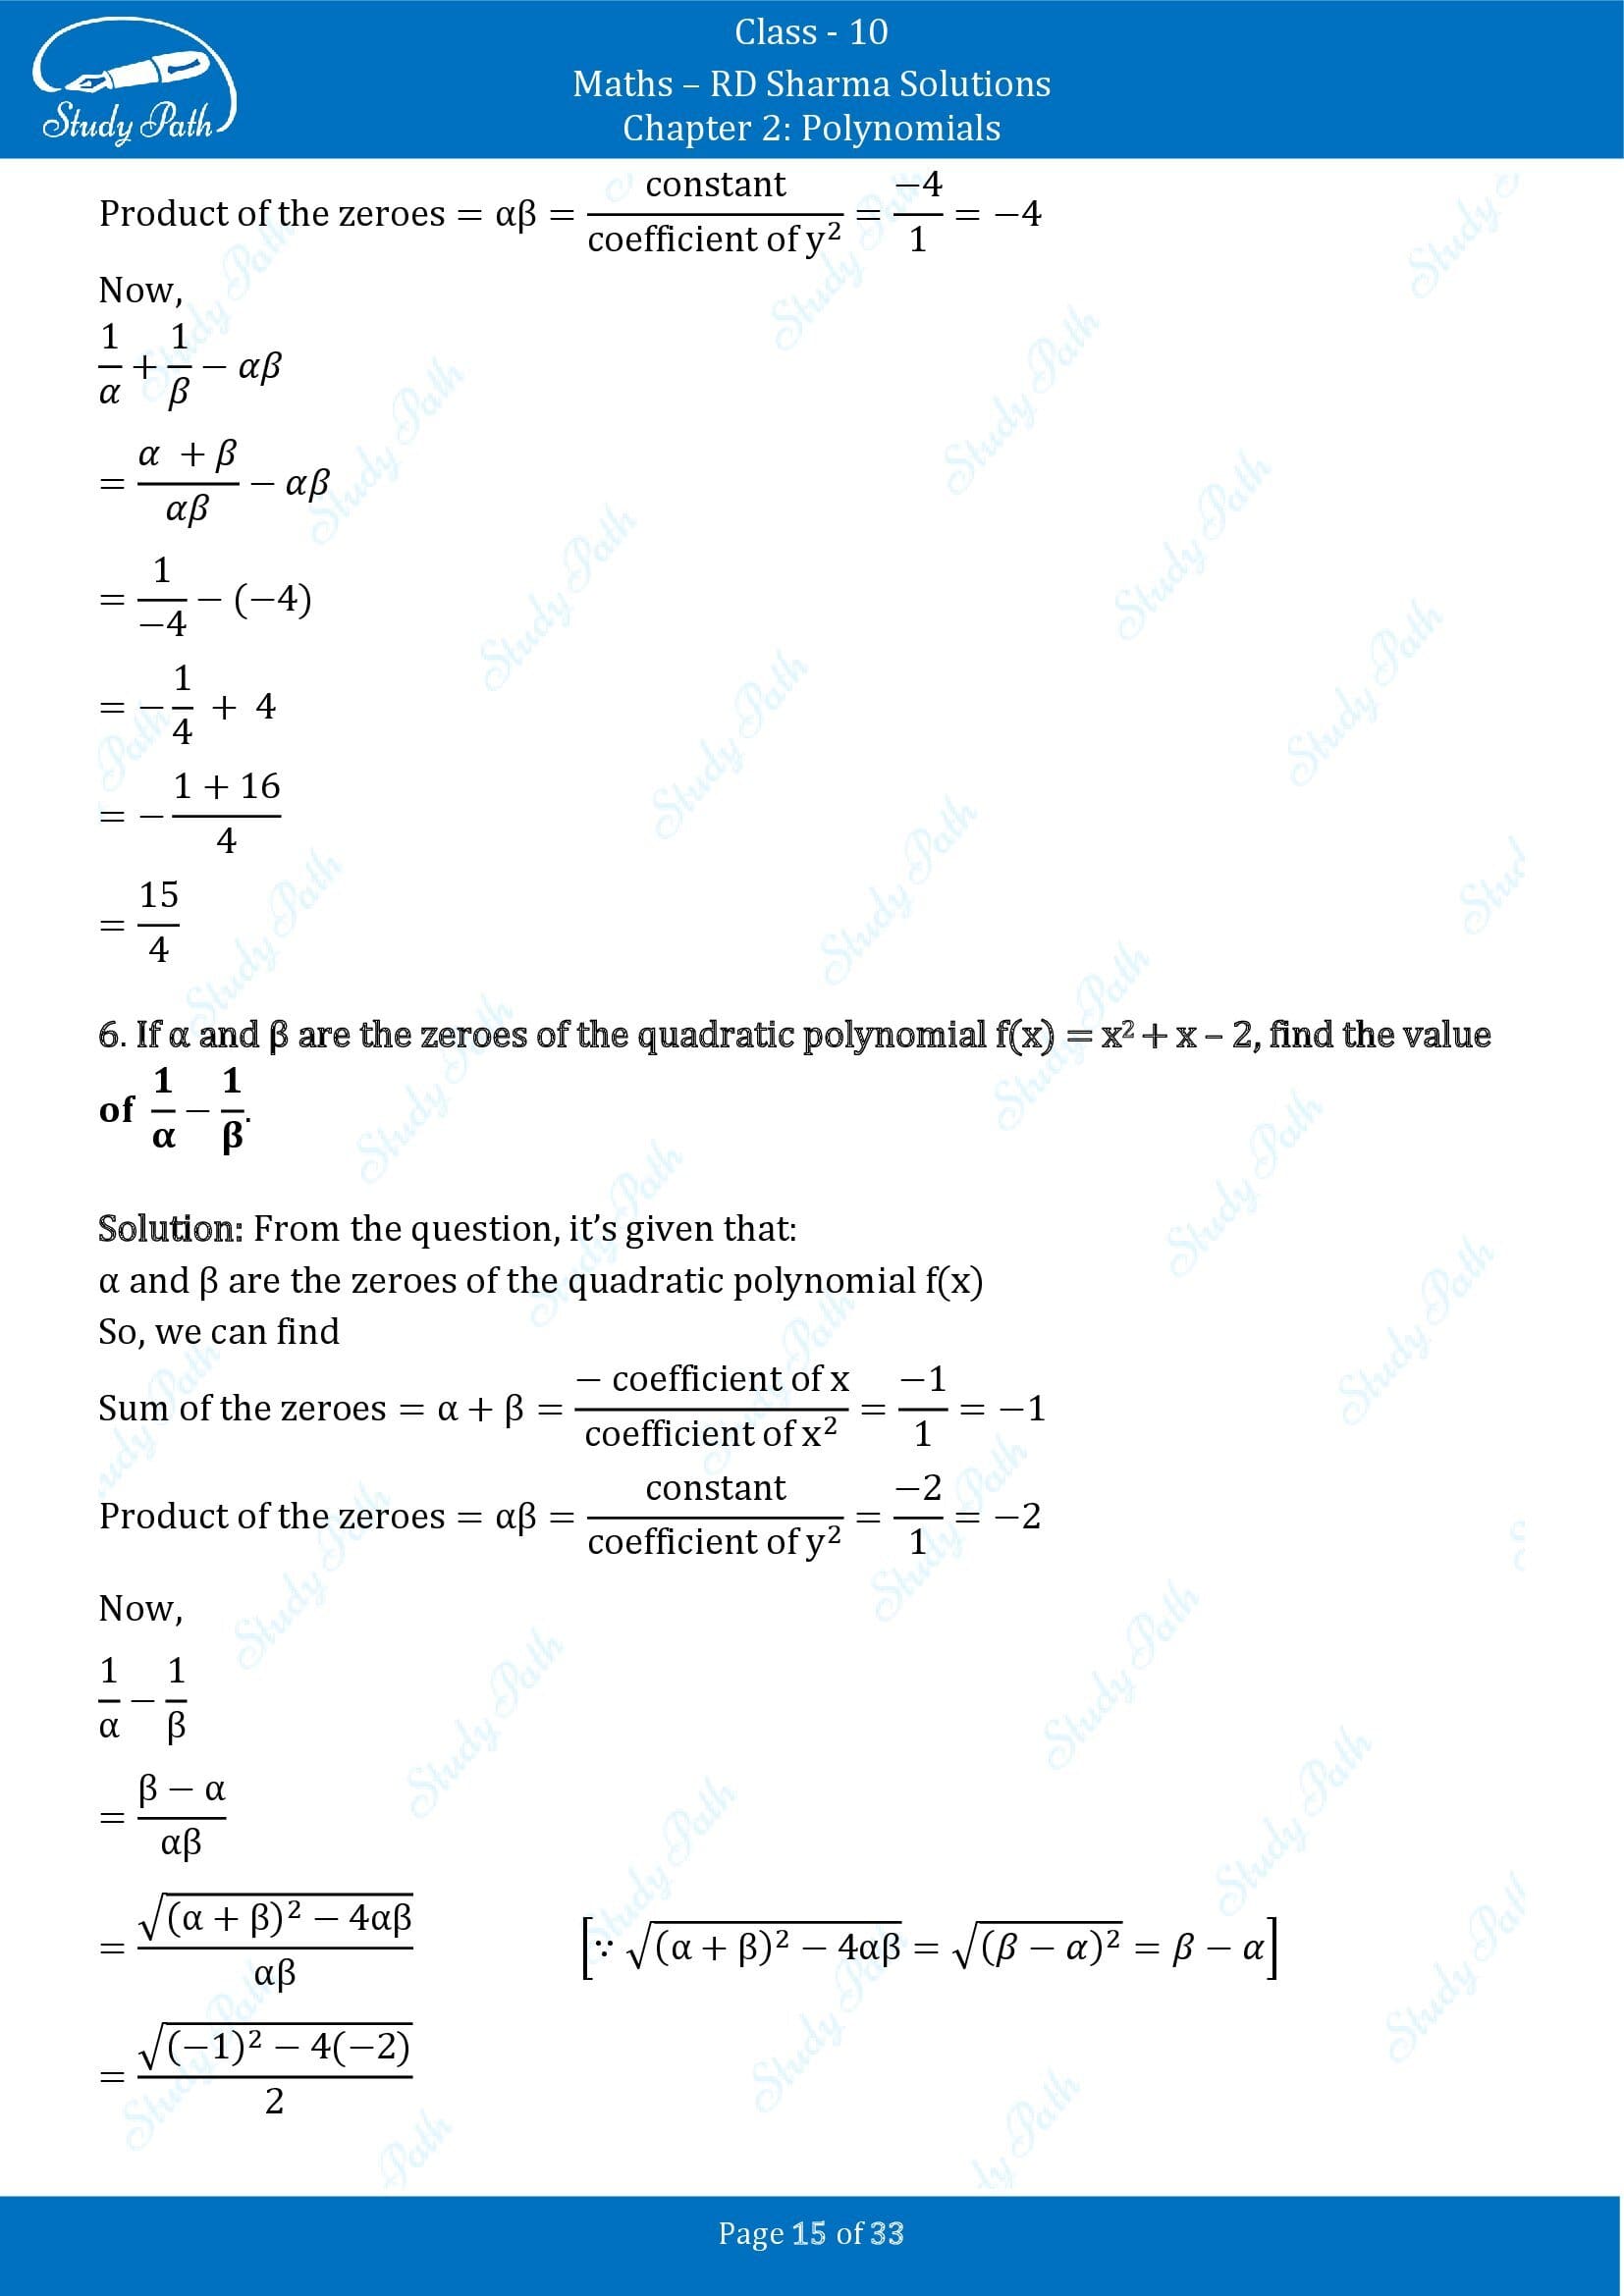 RD Sharma Solutions Class 10 Chapter 2 Polynomials Exercise 2.1 00015